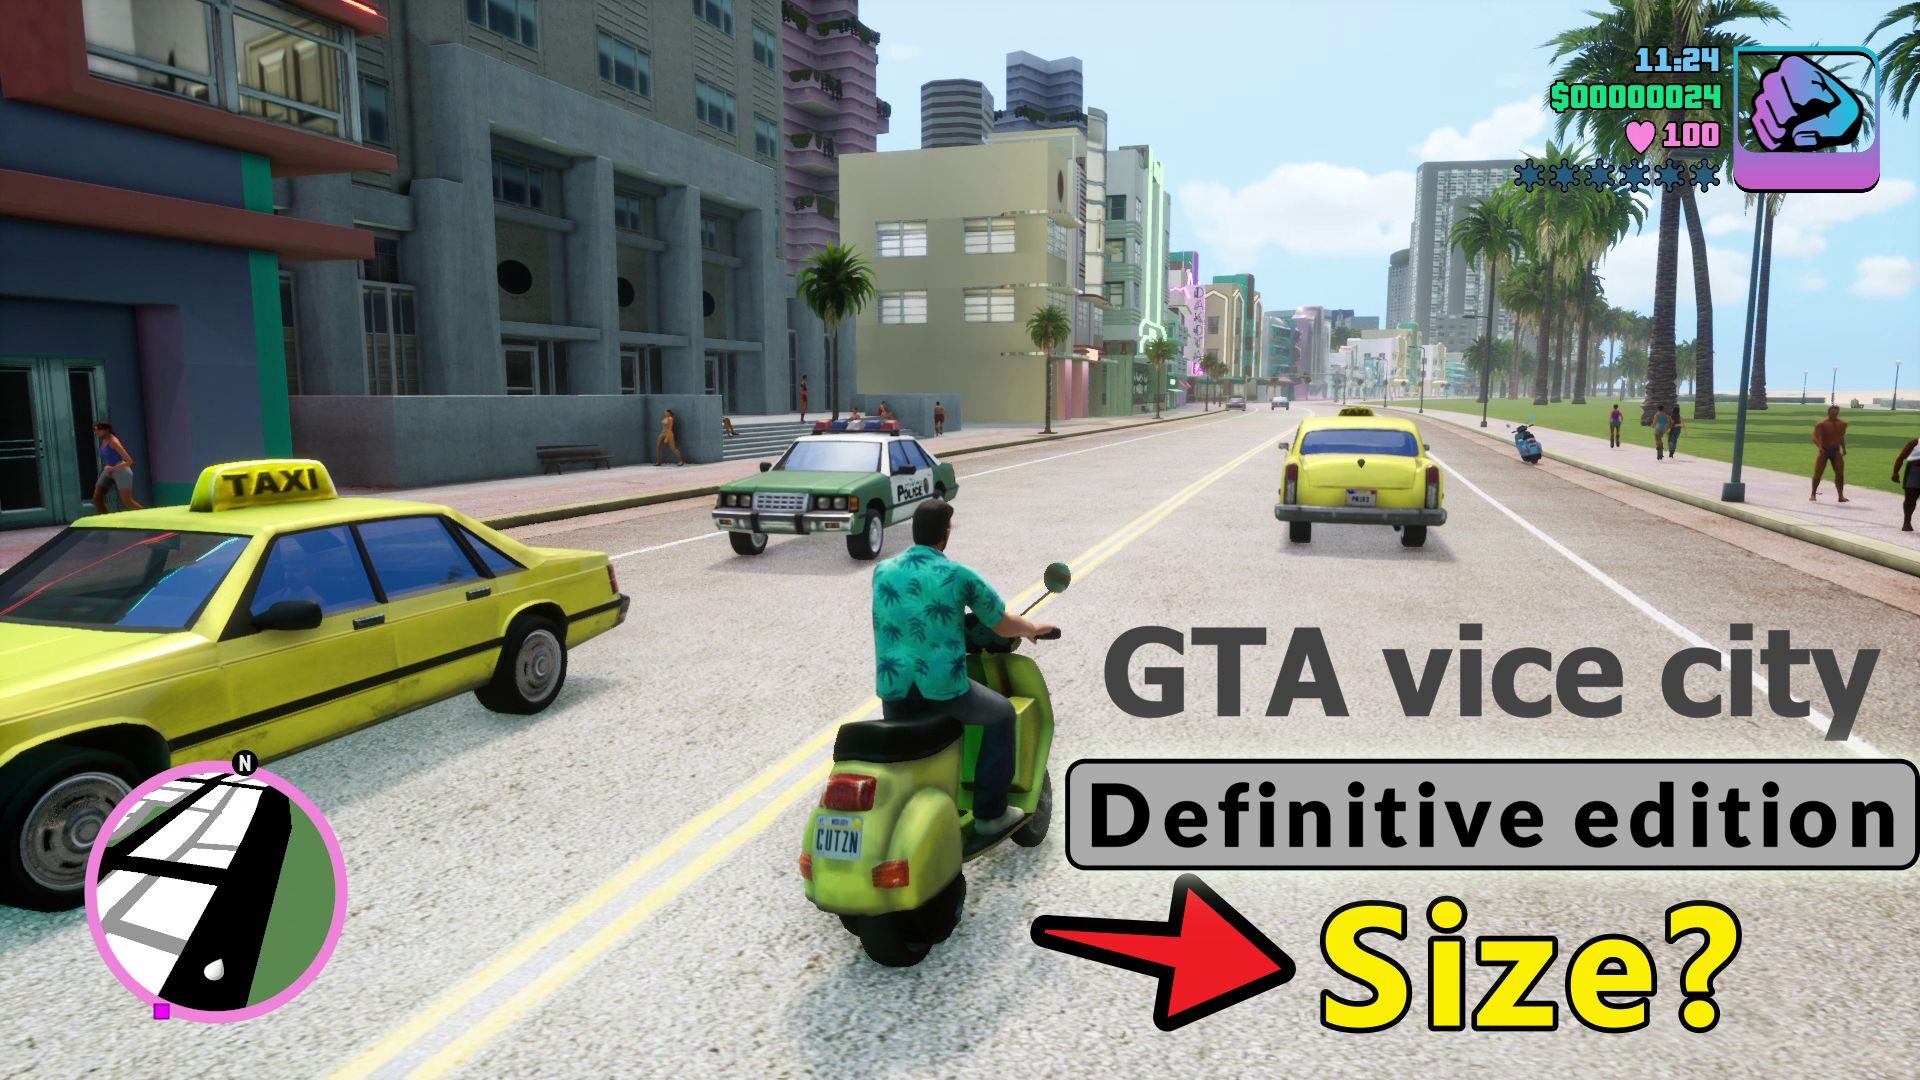 GTA vice city definitive edition real size for each Platform